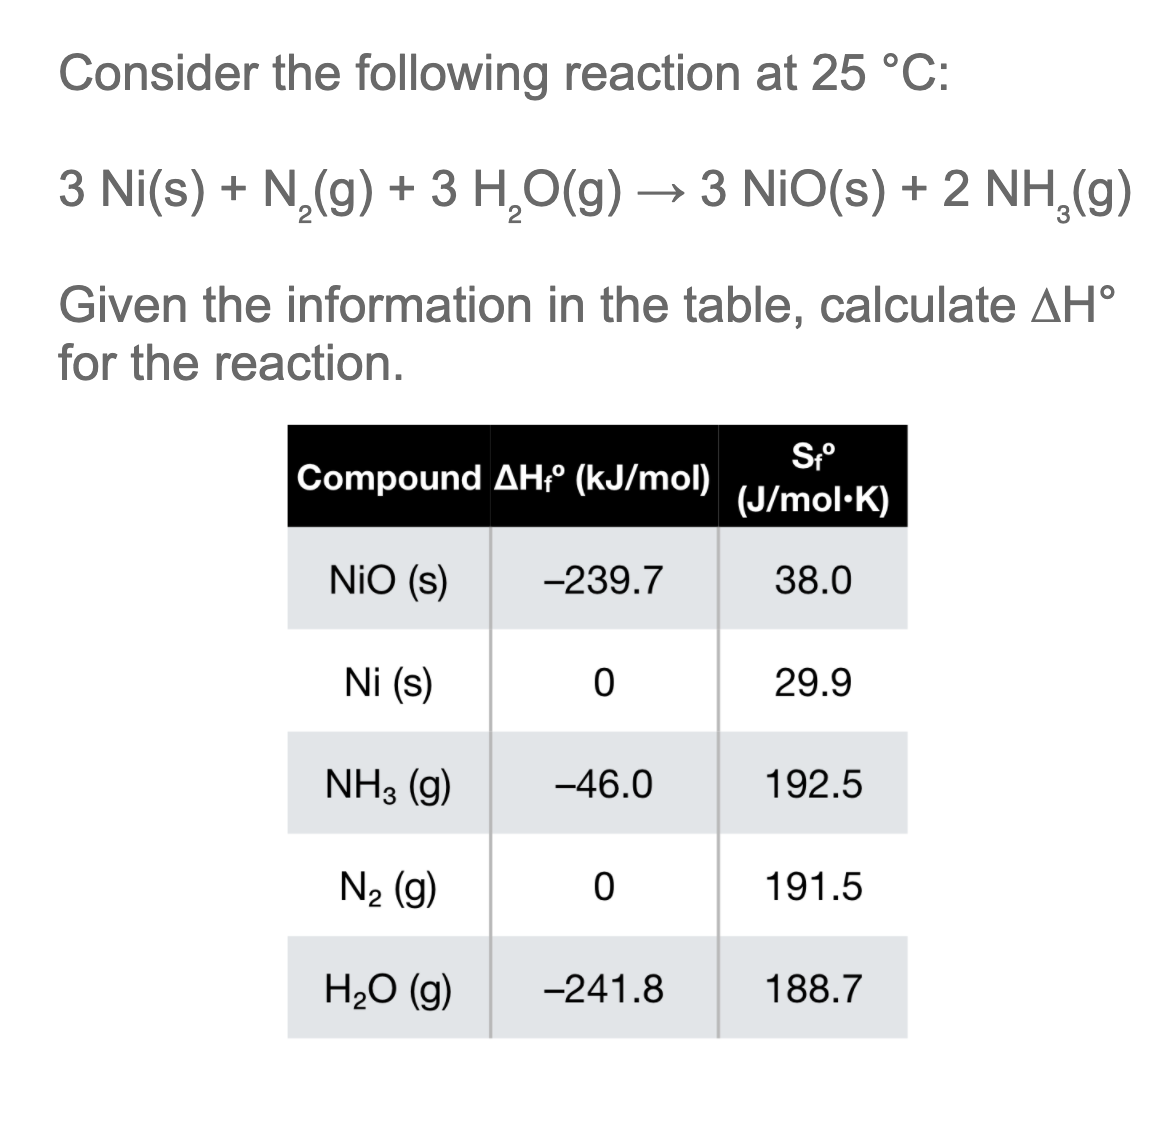 Consider the following reaction at 25 °C:
3 Ni(s) + N,(g) + 3 H,0(g) → 3 NiO(s) + 2 NH,(g)
Given the information in the table, calculate AH°
for the reaction.
Compound AH° (kJ/mol)
(J/mol·K)
NiO (s)
-239.7
38.0
Ni (s)
29.9
NH3 (g)
-46.0
192.5
N2 (g)
191.5
H20 (g)
-241.8
188.7
